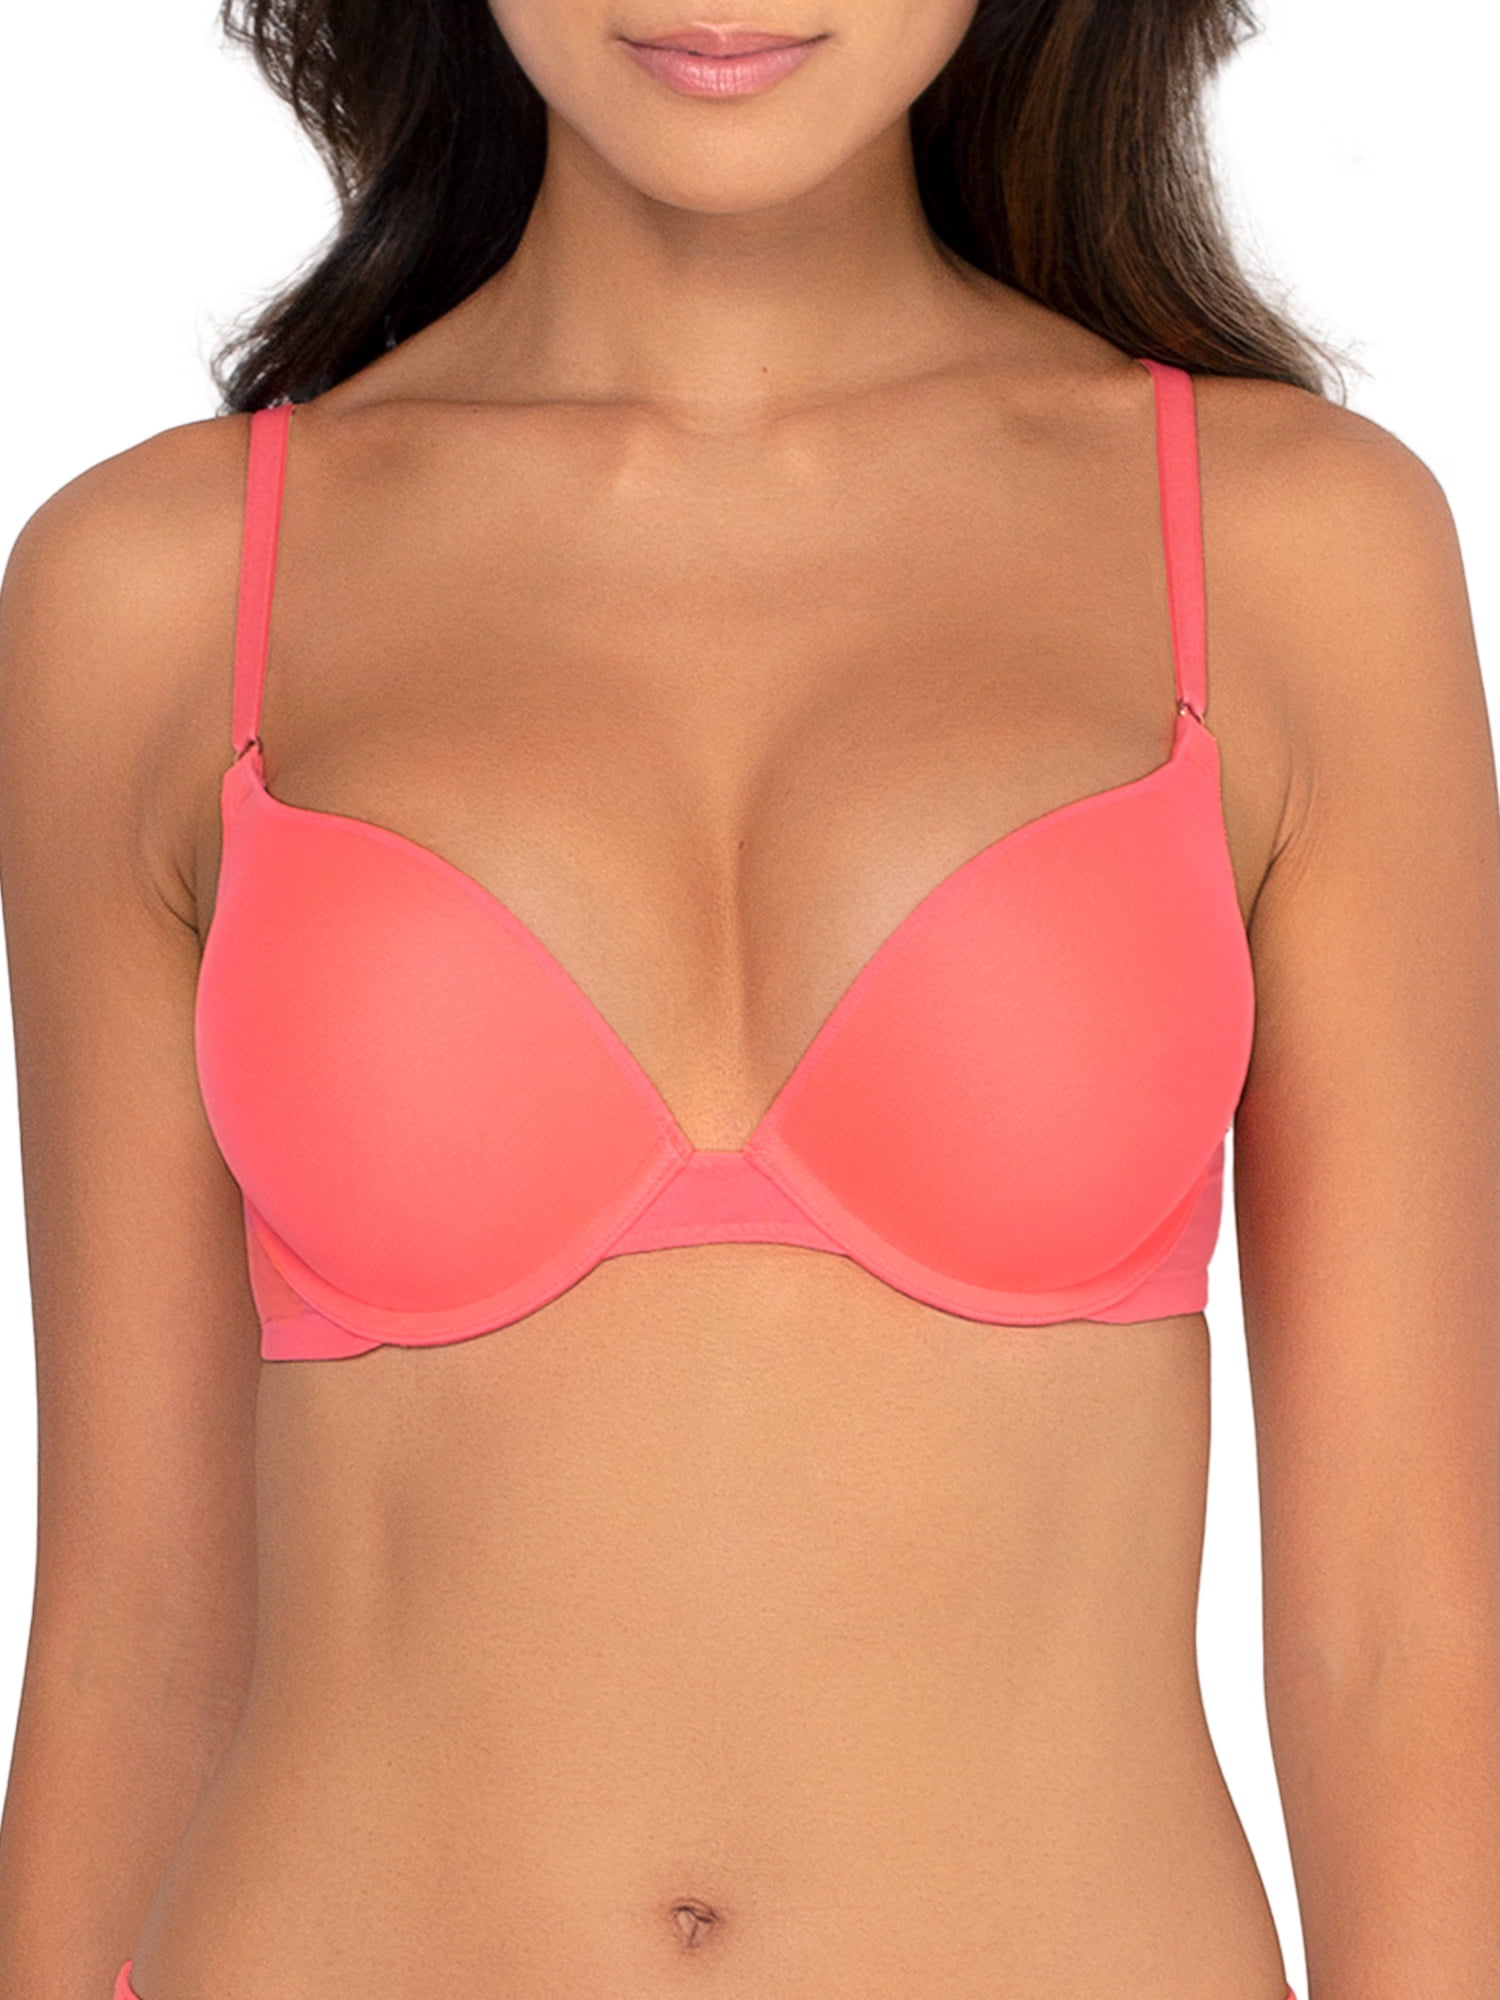 Buy Kaamastra Women's Pink Sexy Spiked Bra (Bust 26 to 34, 32A) at